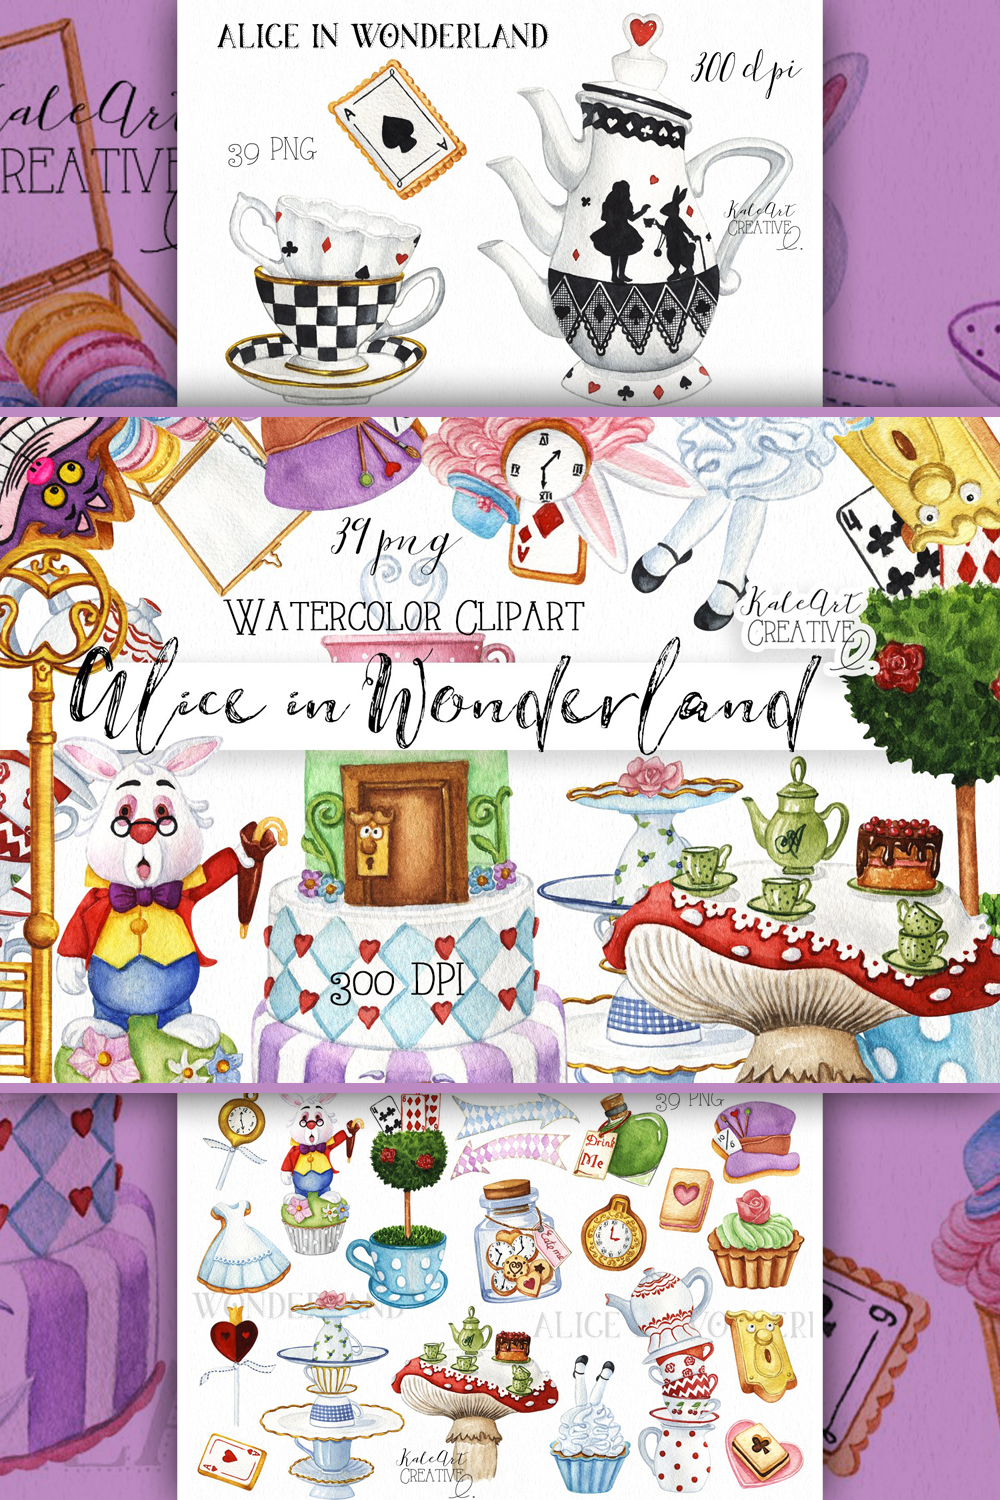 Alice in wonderland sweets watercolor clipart of pinterest.